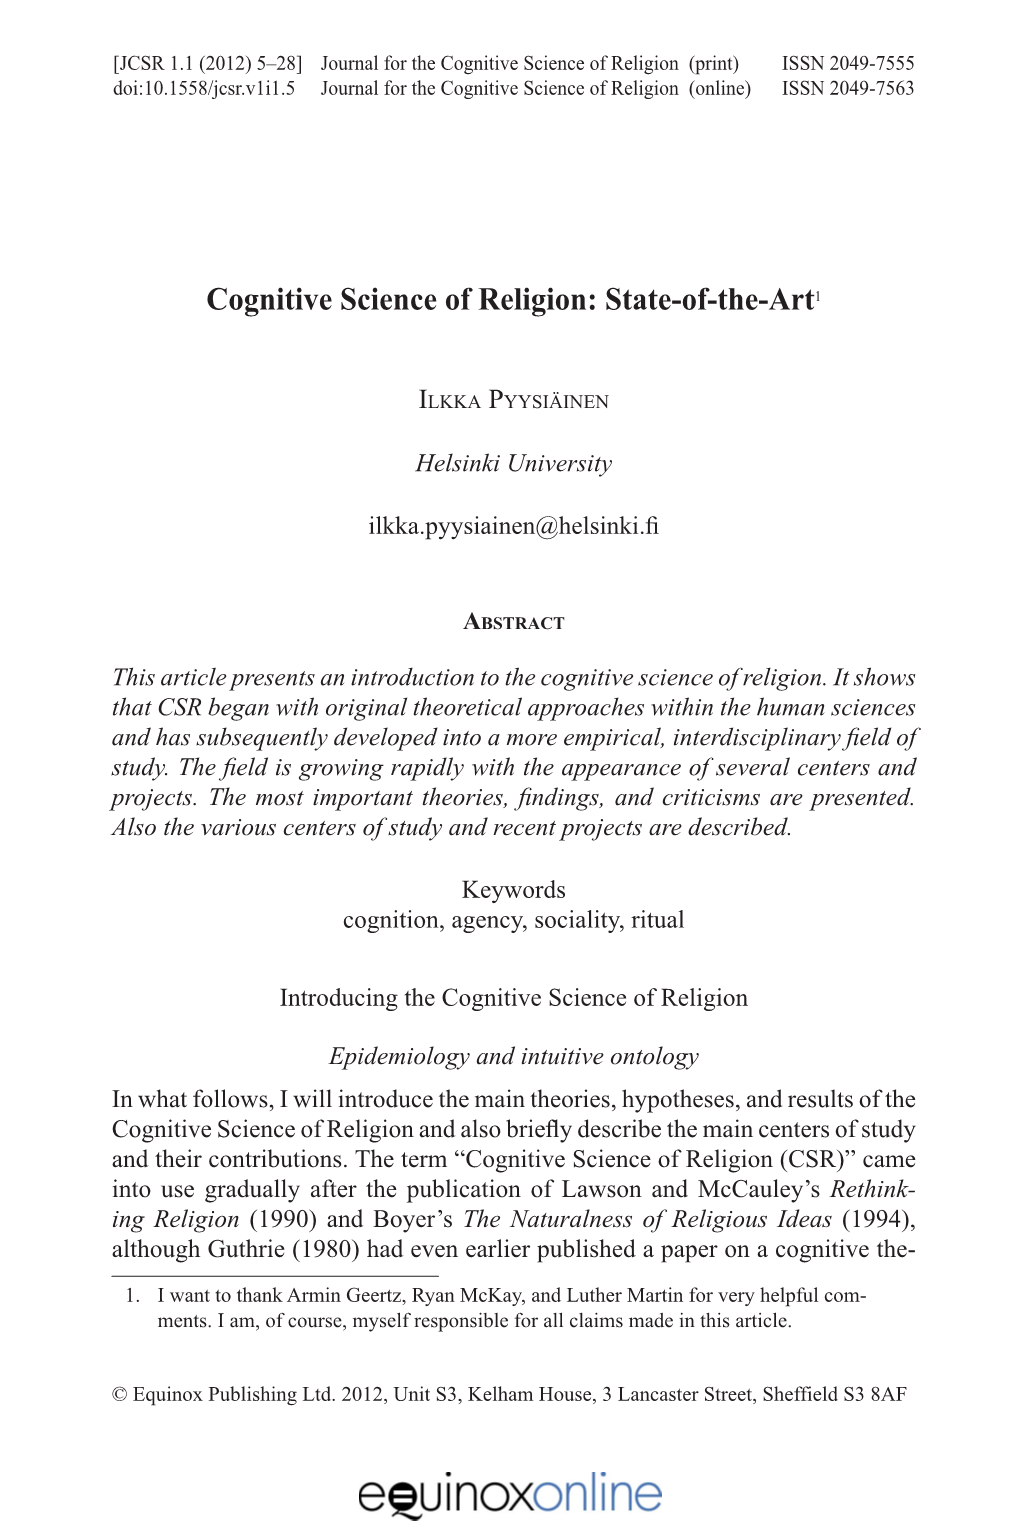 Cognitive Science of Religion (Print) ISSN 2049-7555 Doi:10.1558/Jcsr.V1i1.5 Journal for the Cognitive Science of Religion (Online) ISSN 2049-7563